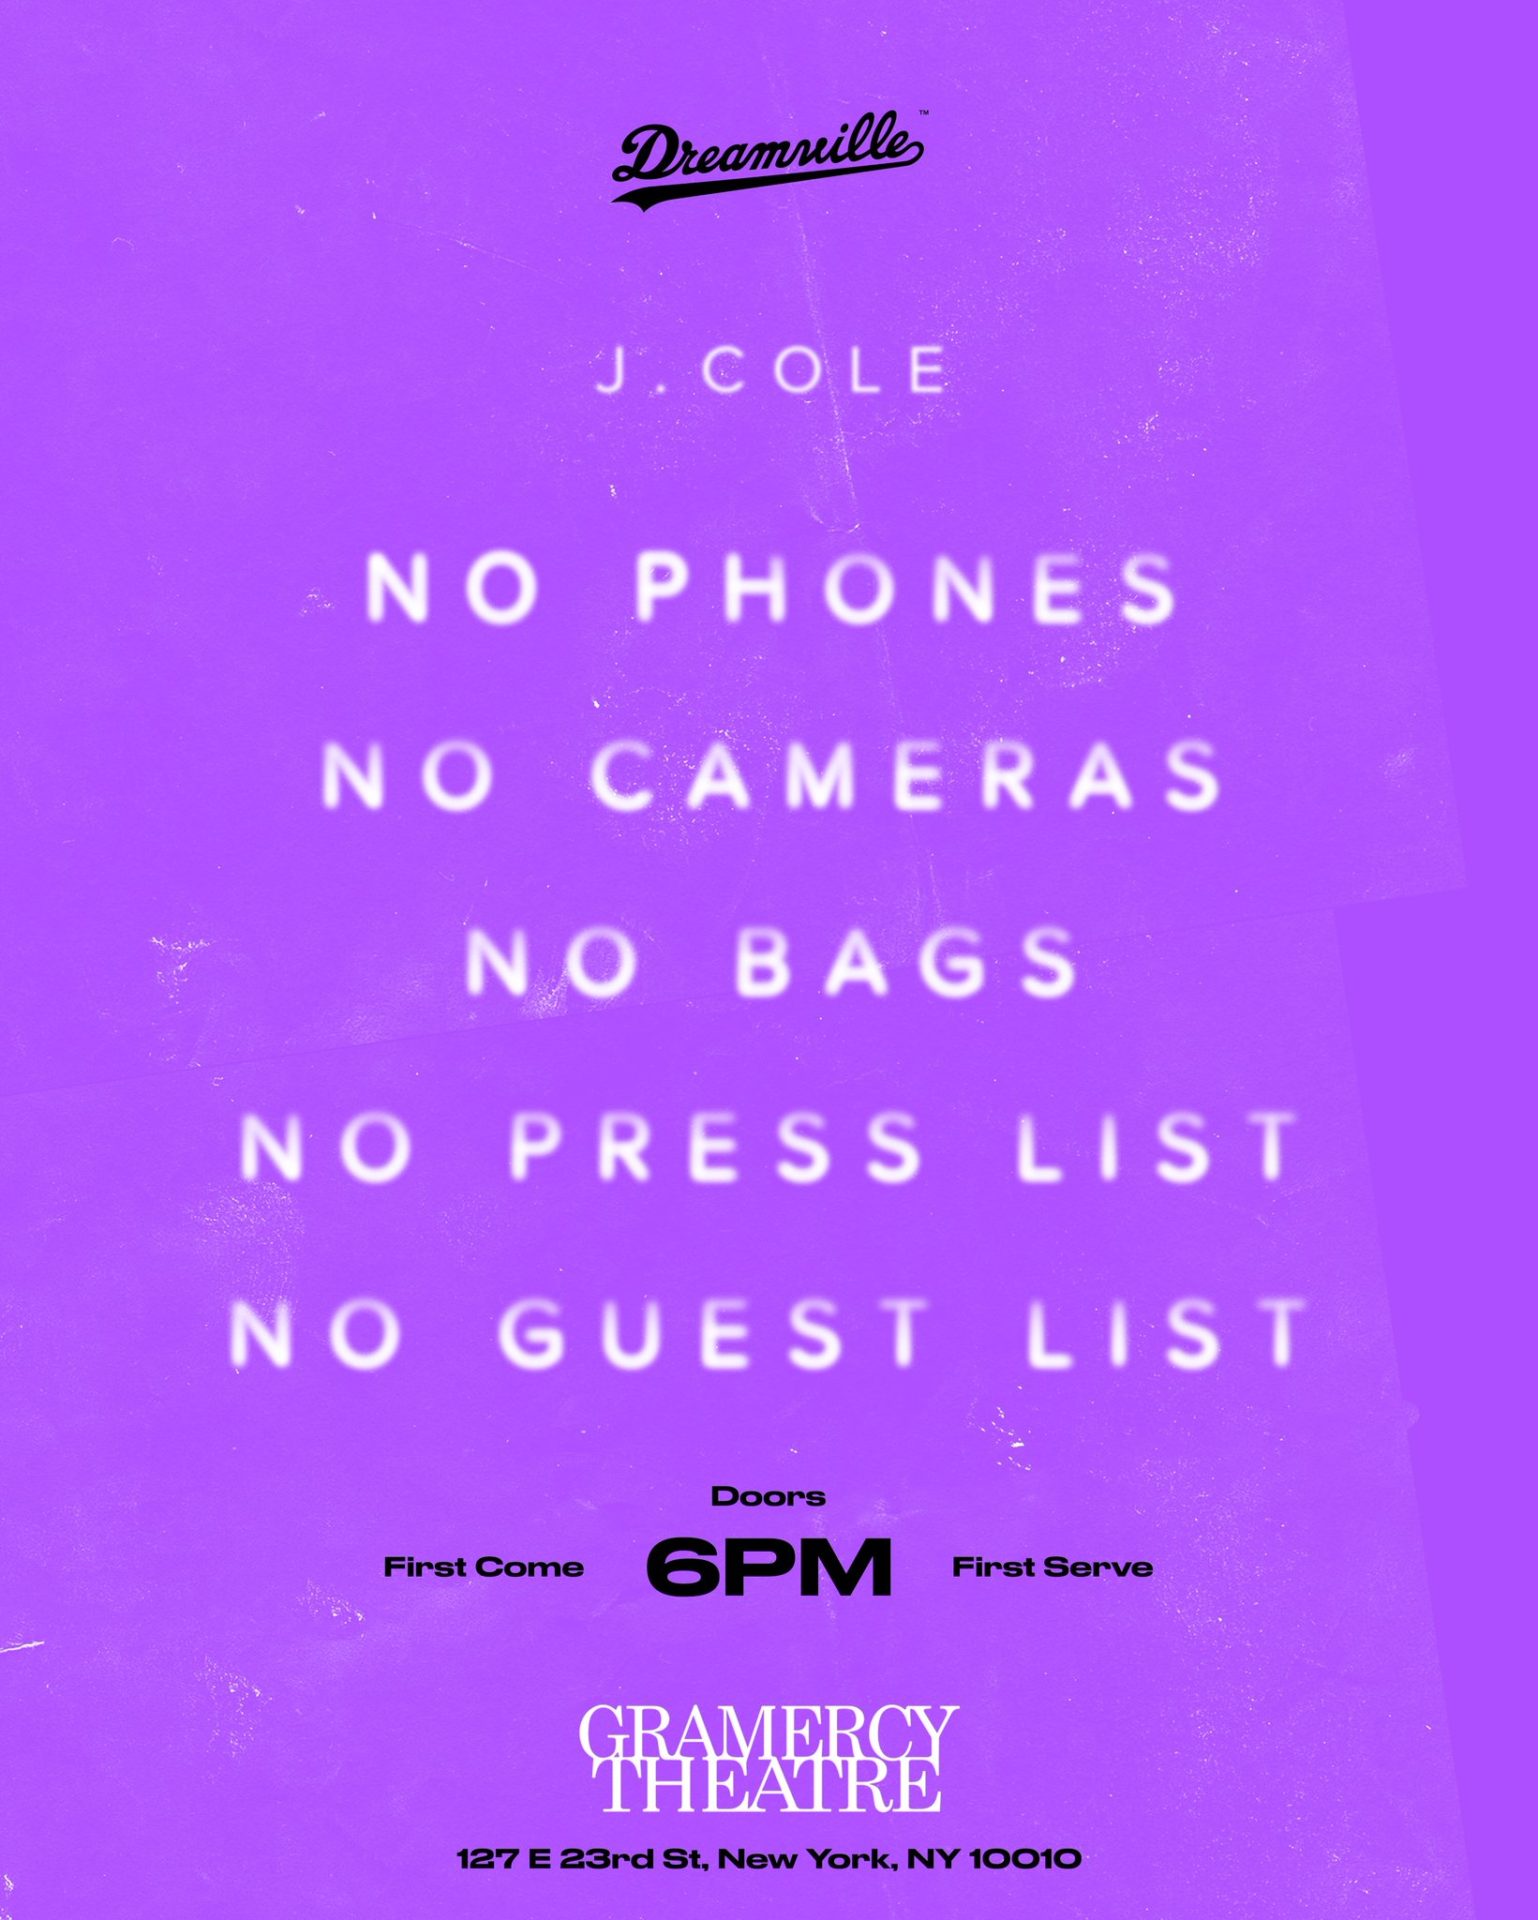 J cole poster